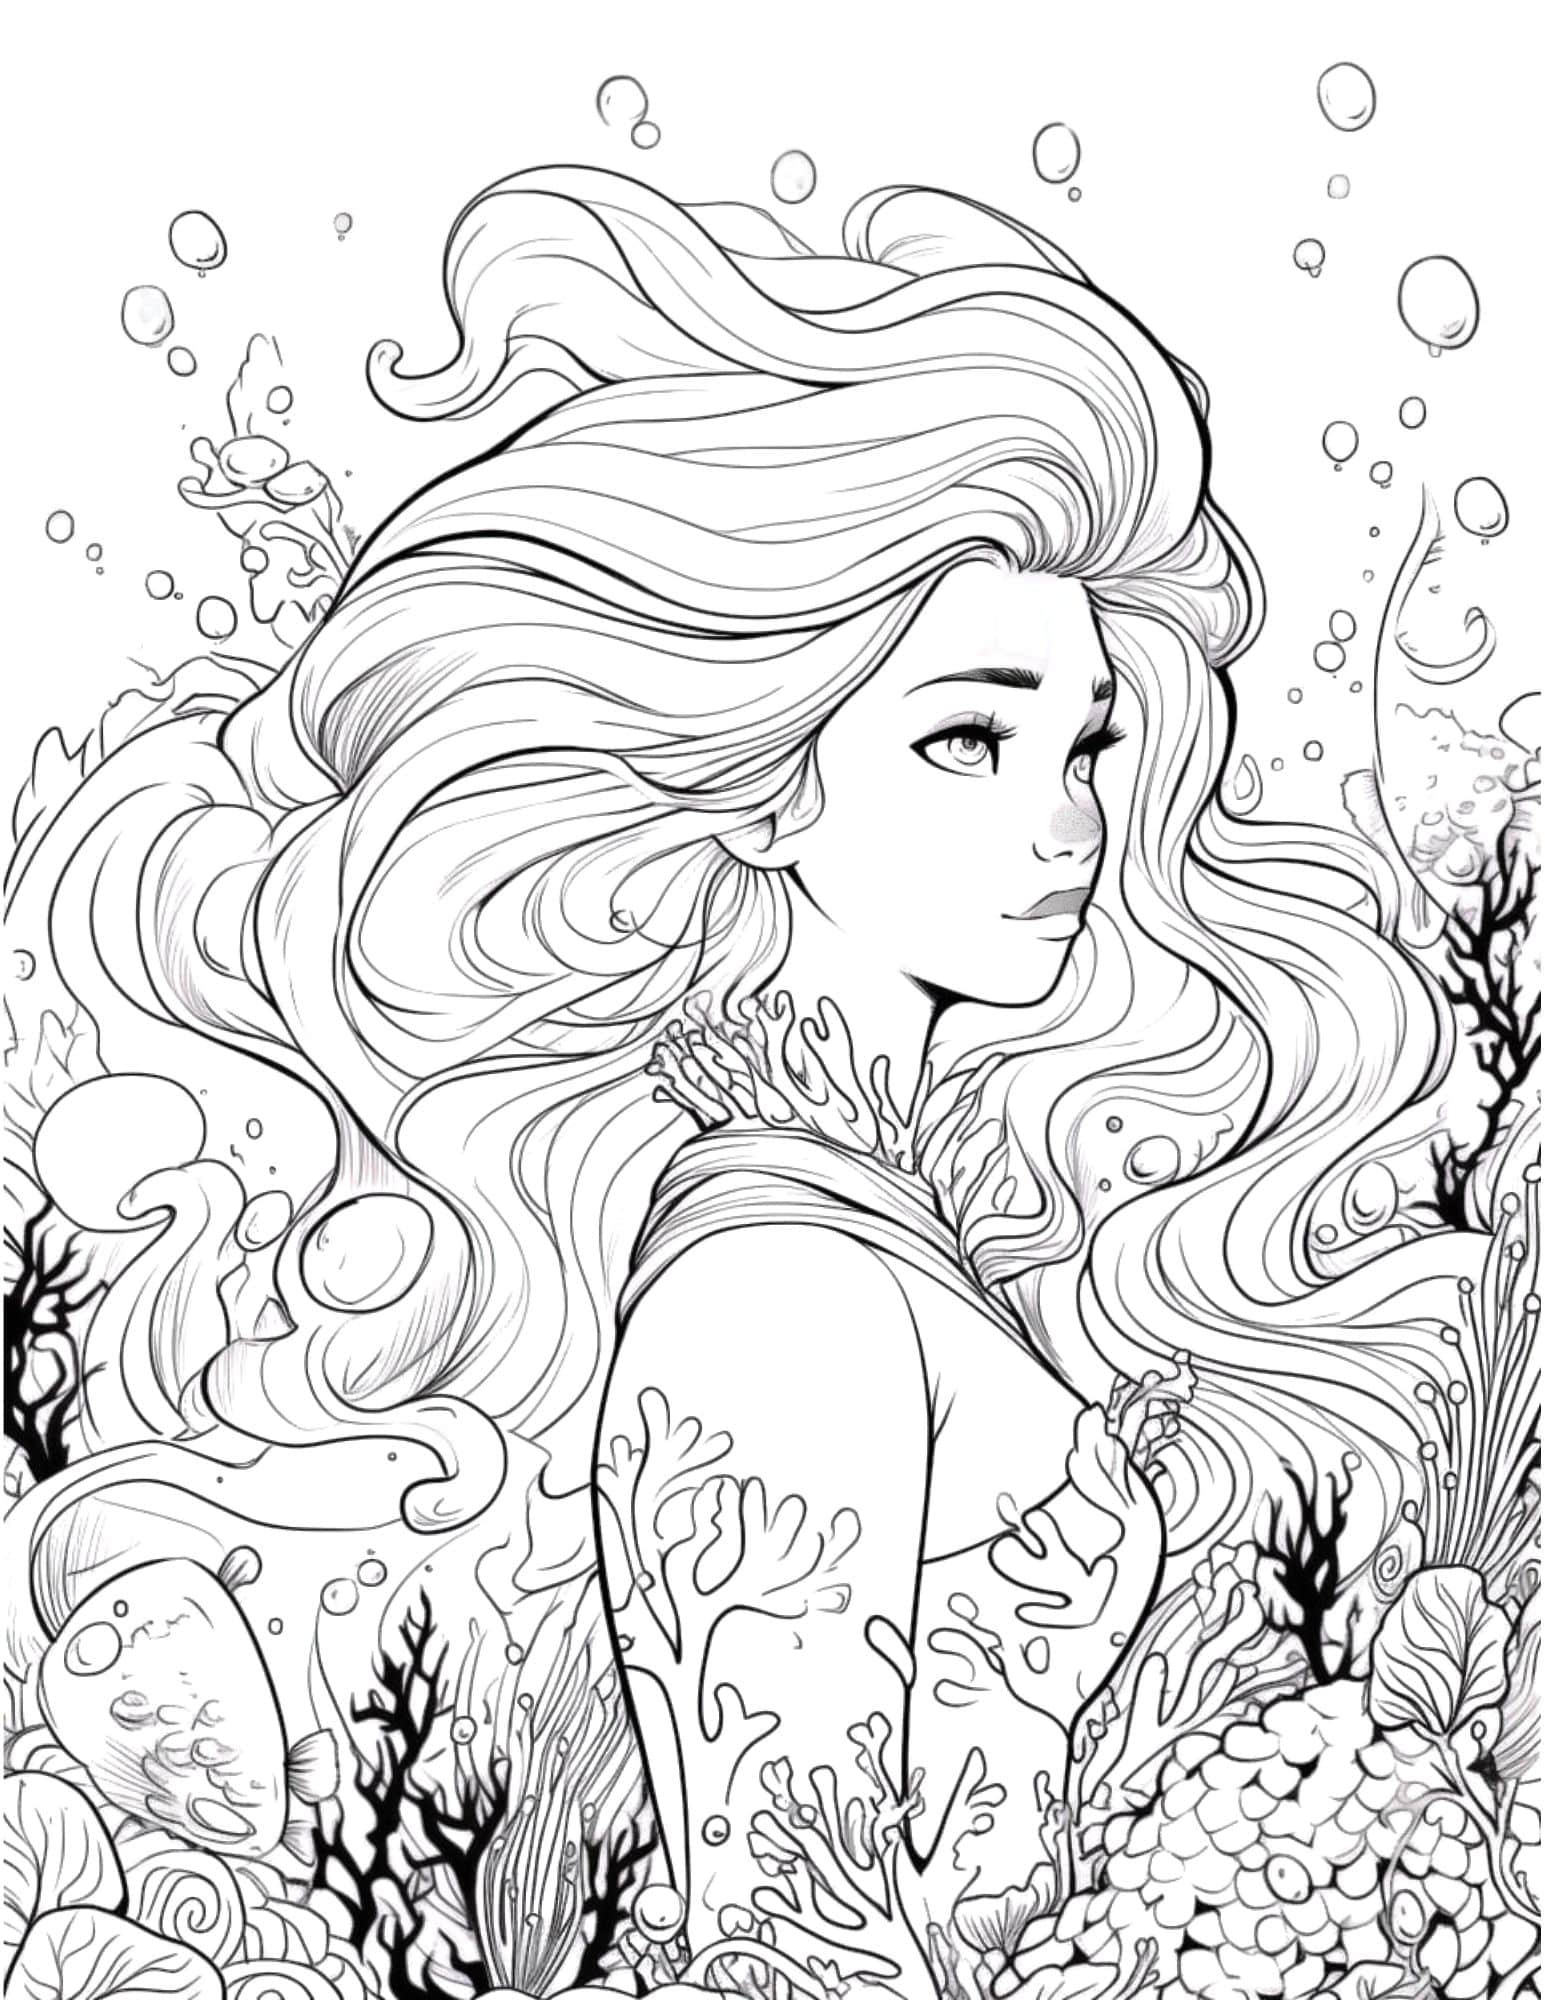 Adult Coloring Pages - set of free ocean inspired printables